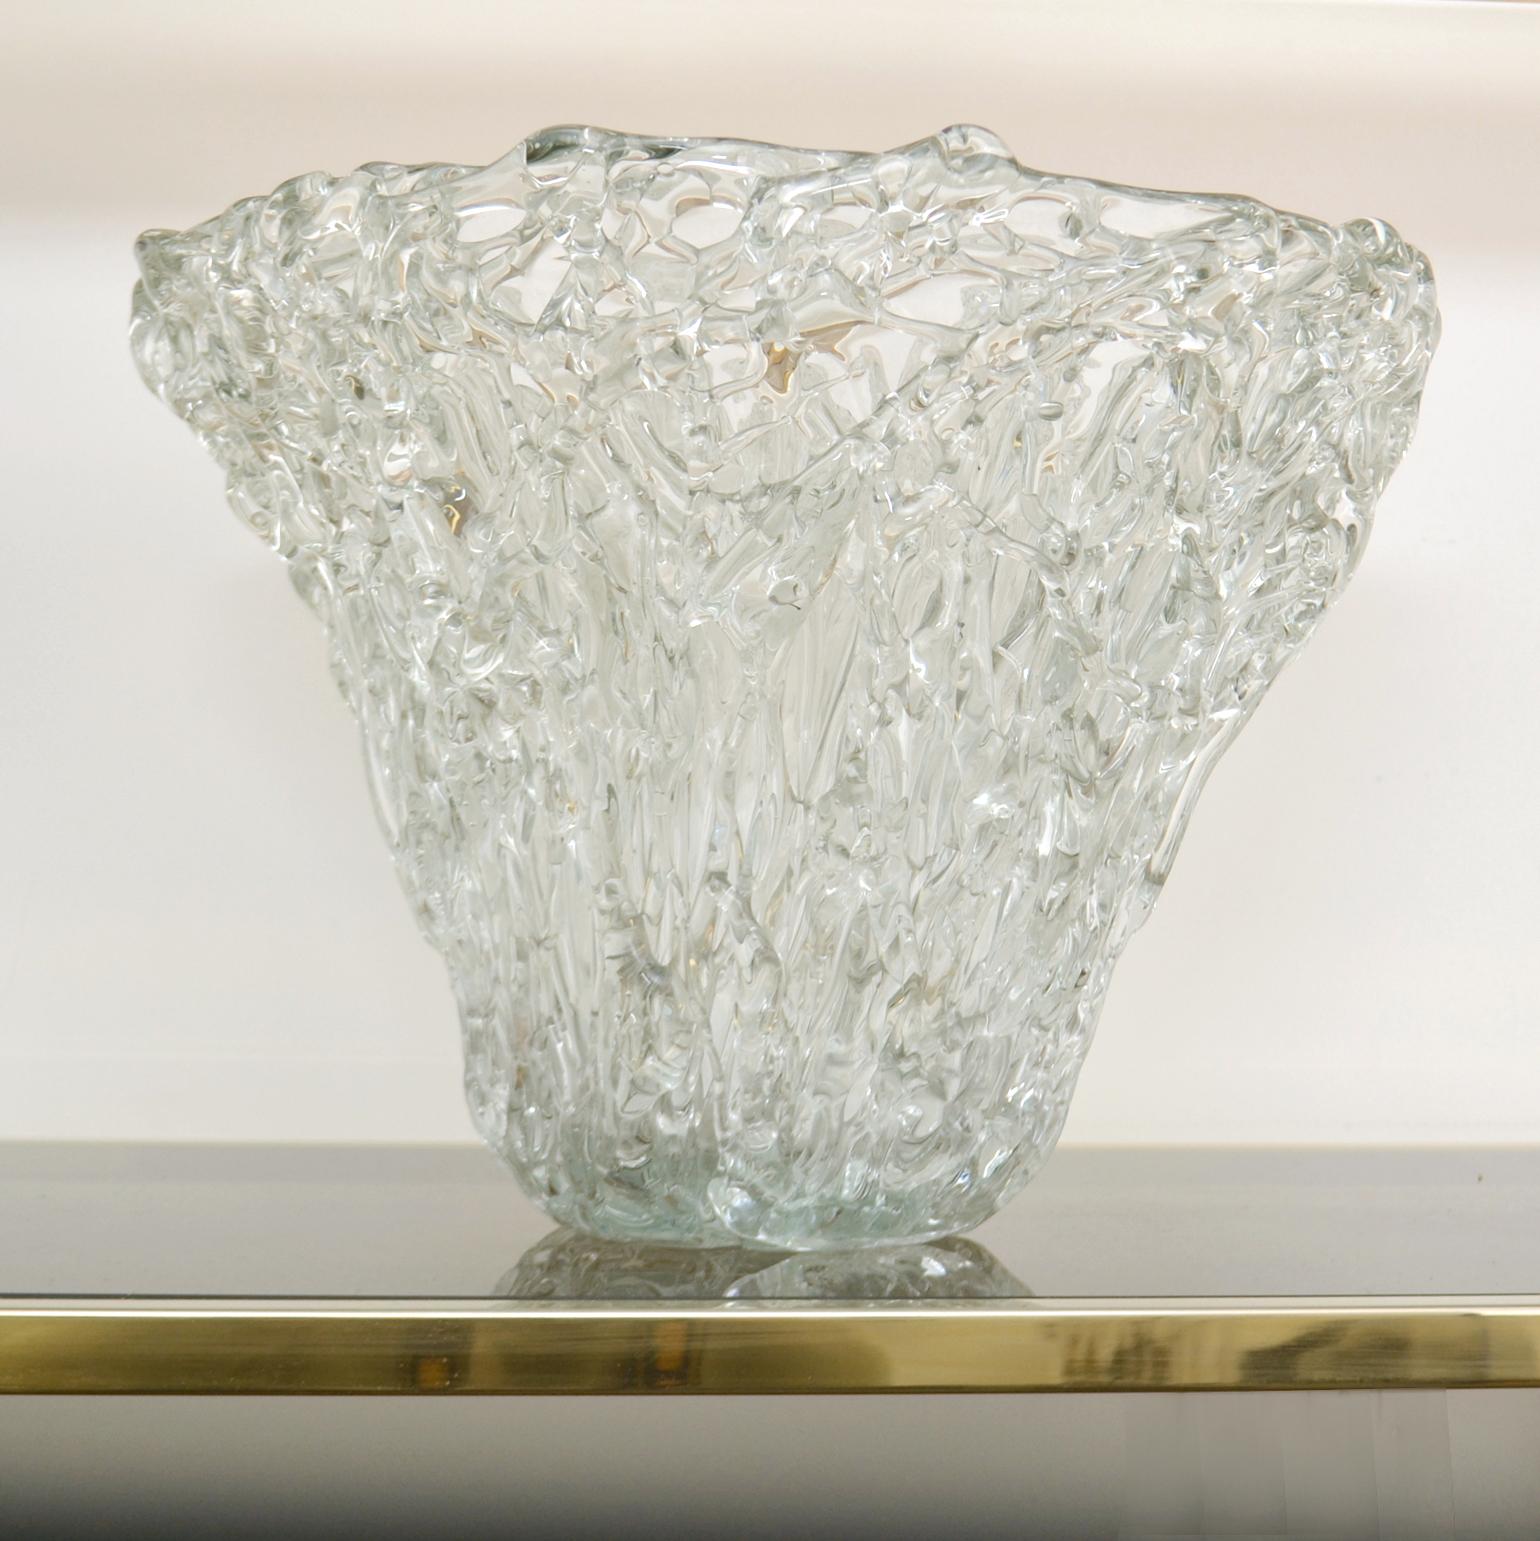 The 1980's coned shaped art glass vessel was hand blown by Romanian master glass maker Mihai Topescu (1956) and is signed inside of the bowl. The clear glass is overlaid with trails of snake shaped in clear glass dripped over the surface of the